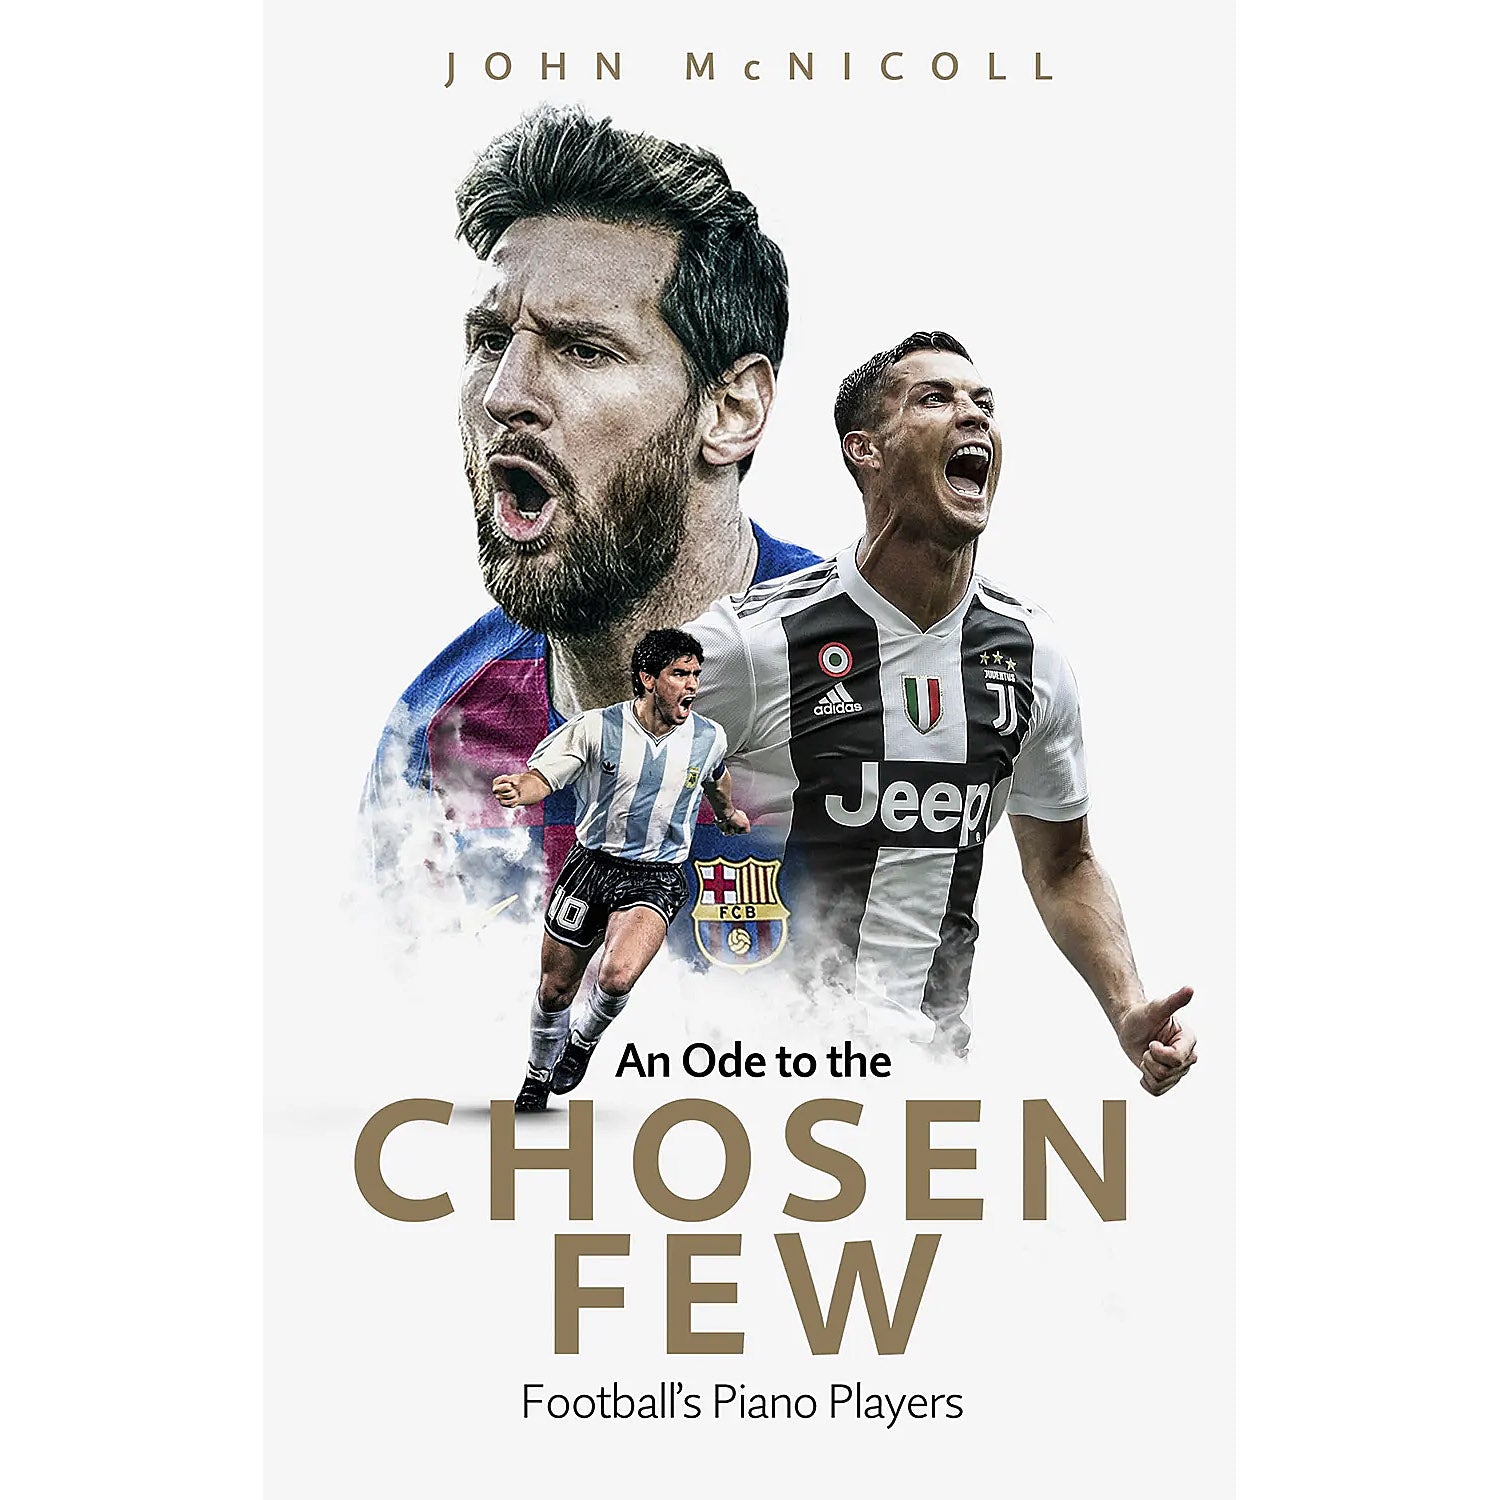 An Ode to the Chosen Few – Football's Piano Players